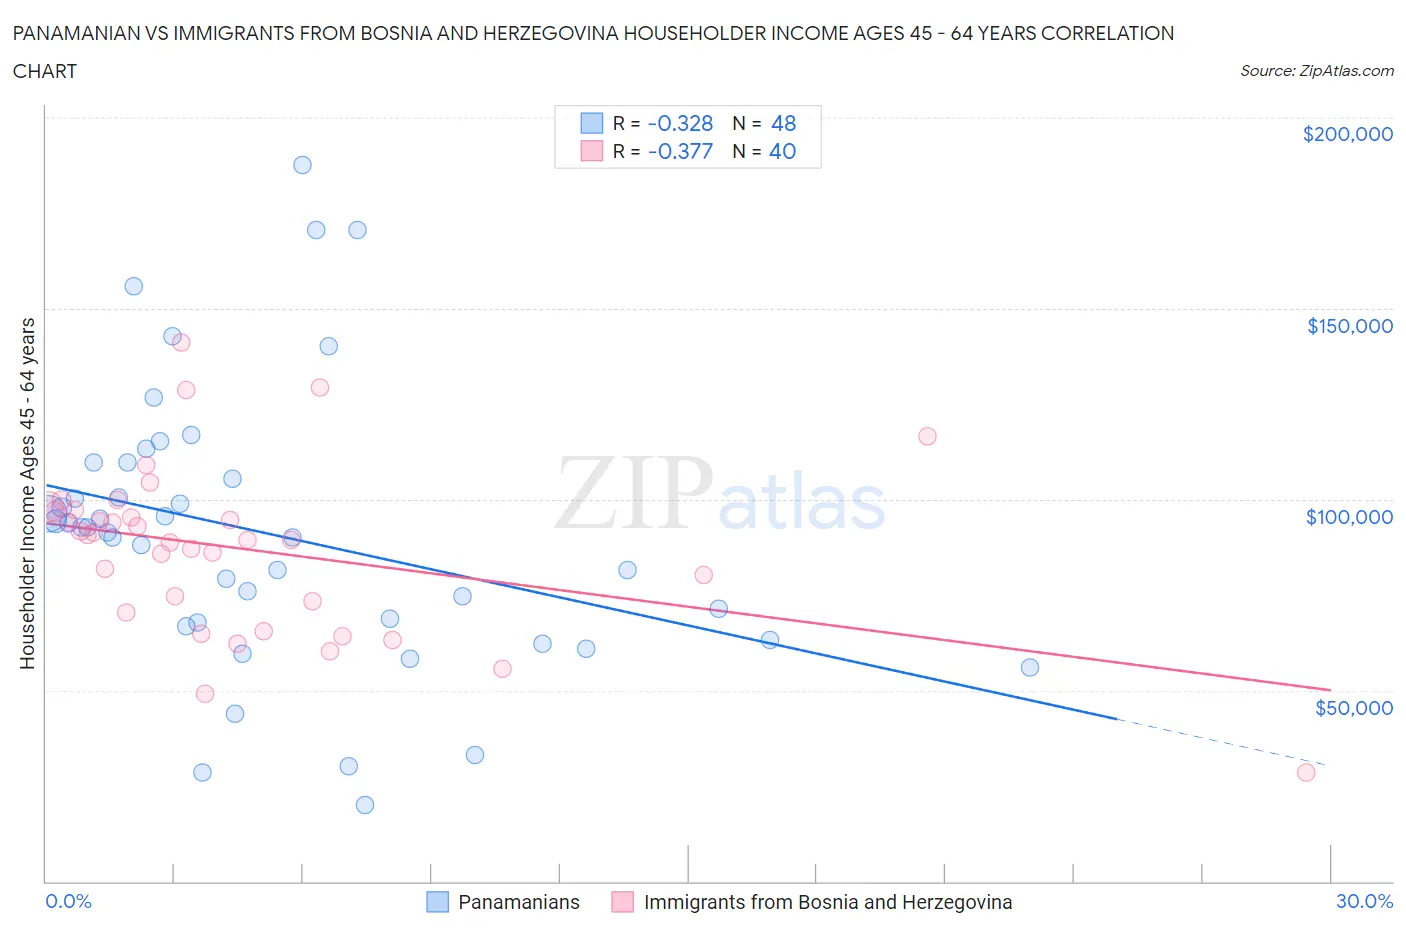 Panamanian vs Immigrants from Bosnia and Herzegovina Householder Income Ages 45 - 64 years